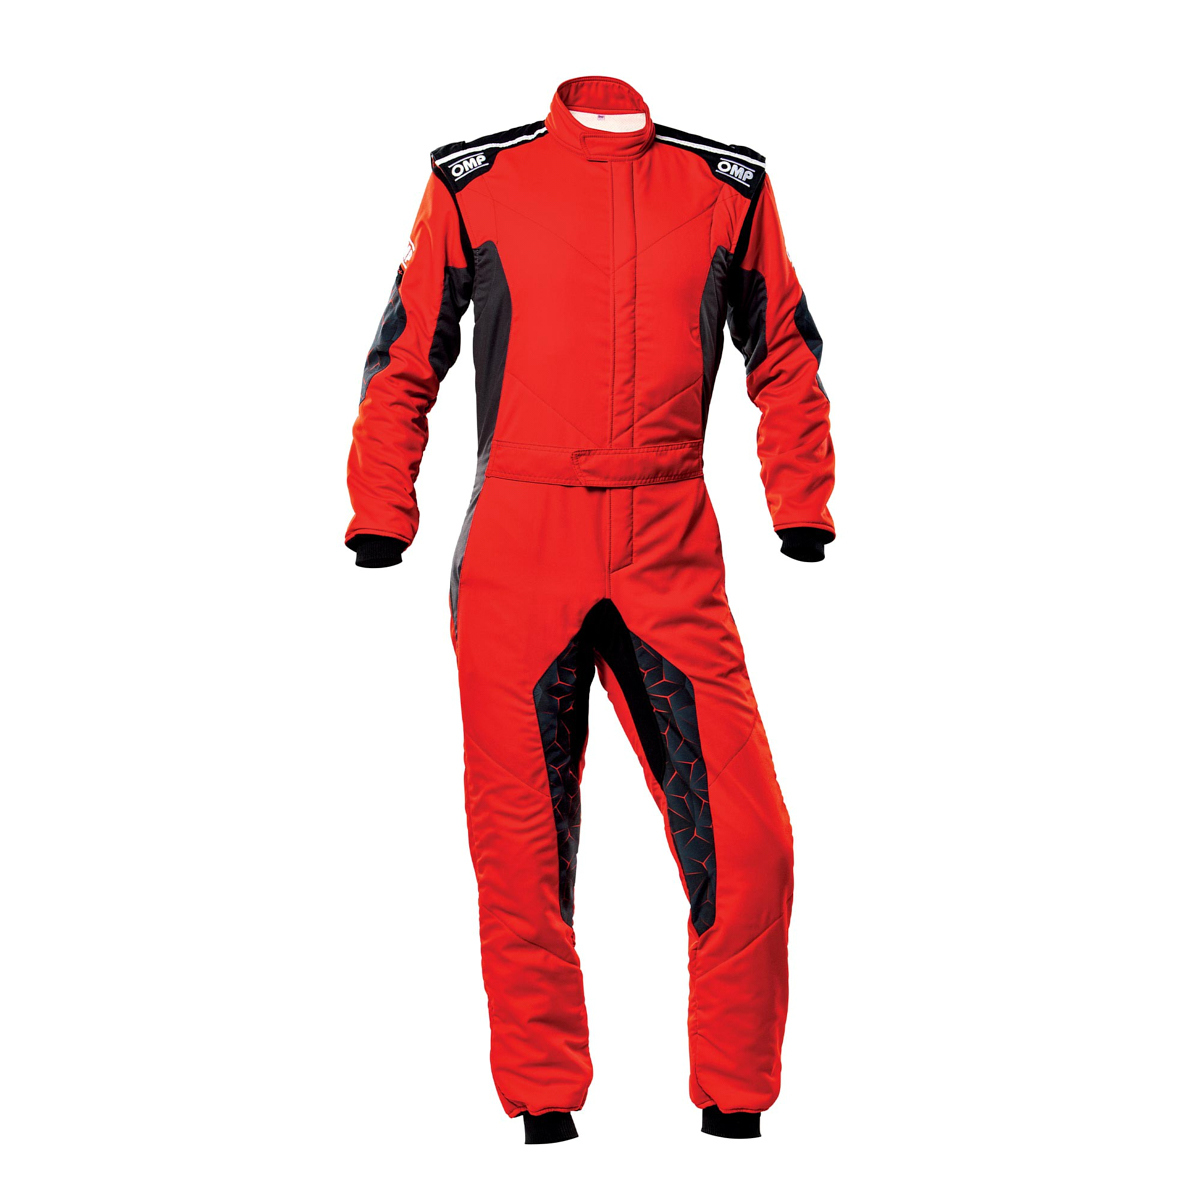 OMP Racing IA0186406056 Driving Suit, Tecnica Hybrid, 1-Piece, FIA Approved, Double Layer, Fire Retardant Fabric, Red / Black, Size 56, Large, Each